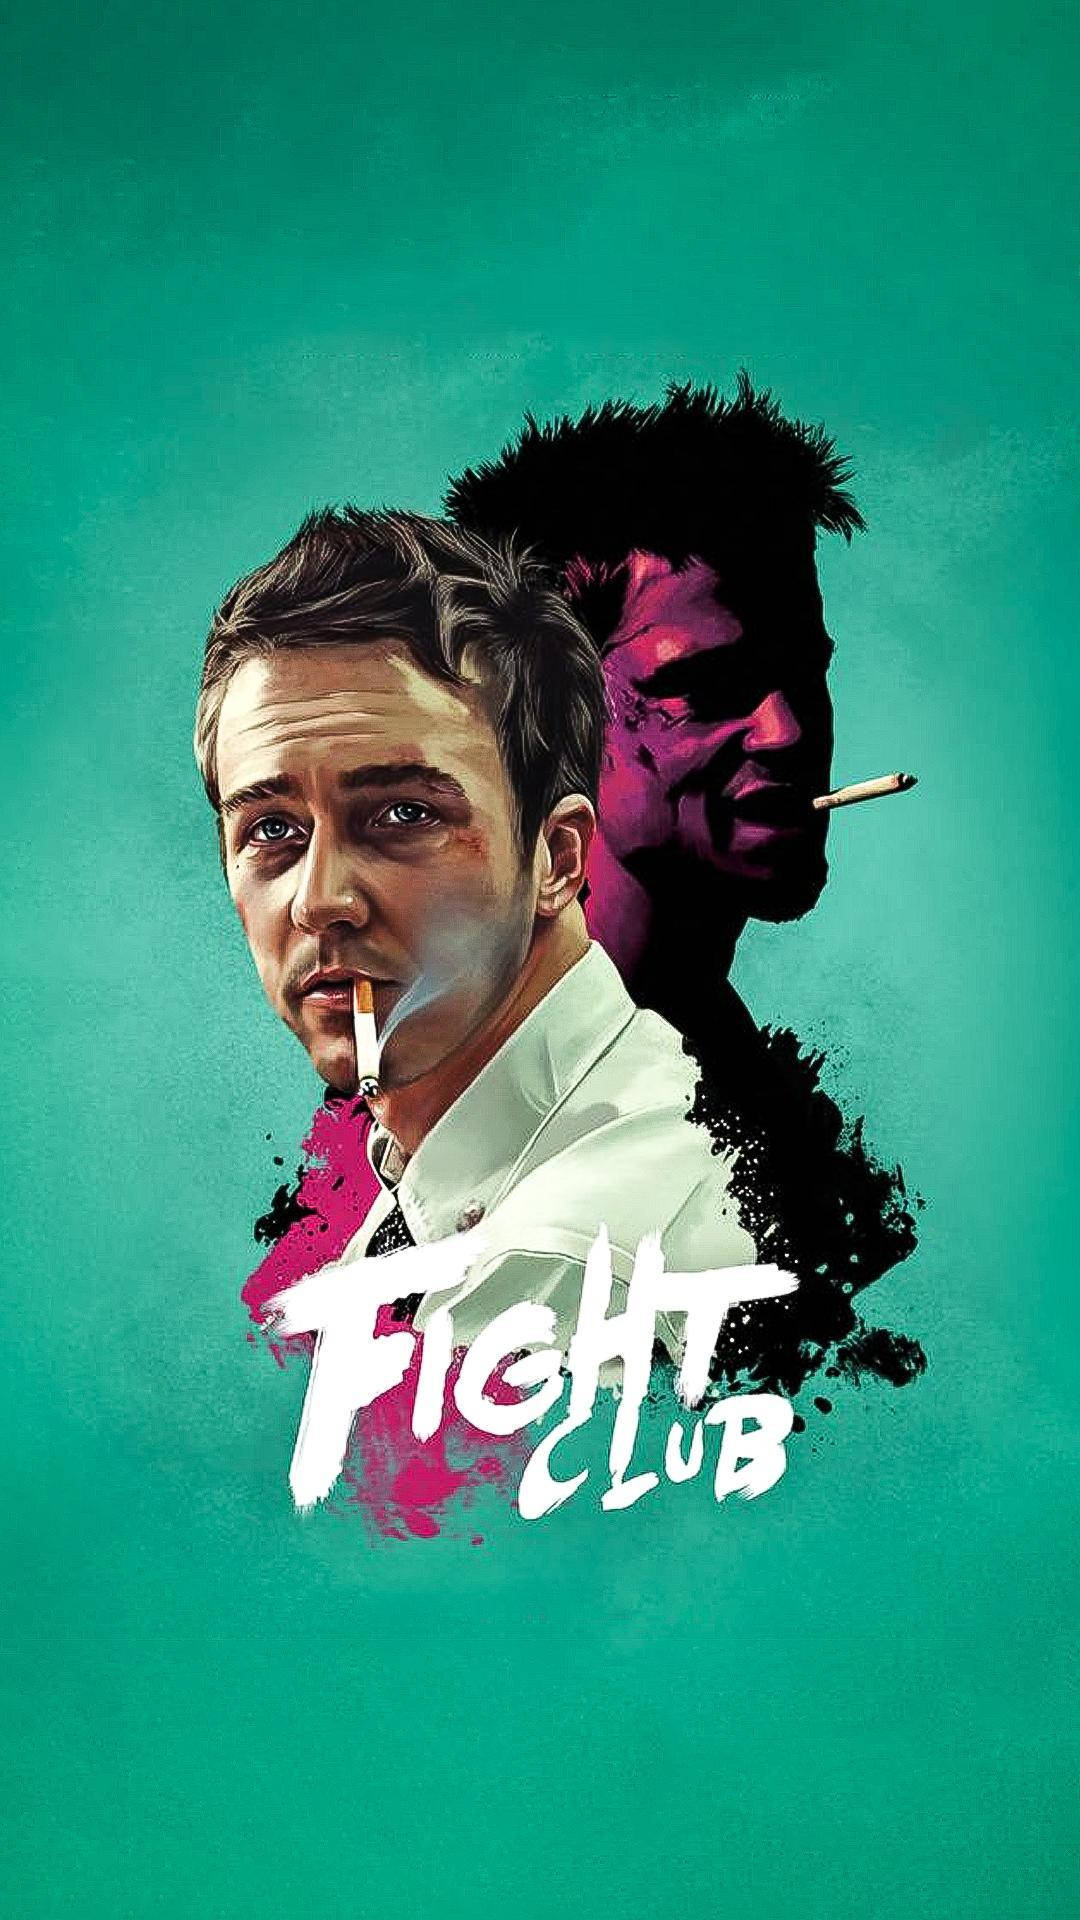 Fight Club Movie Poster Wallpaper